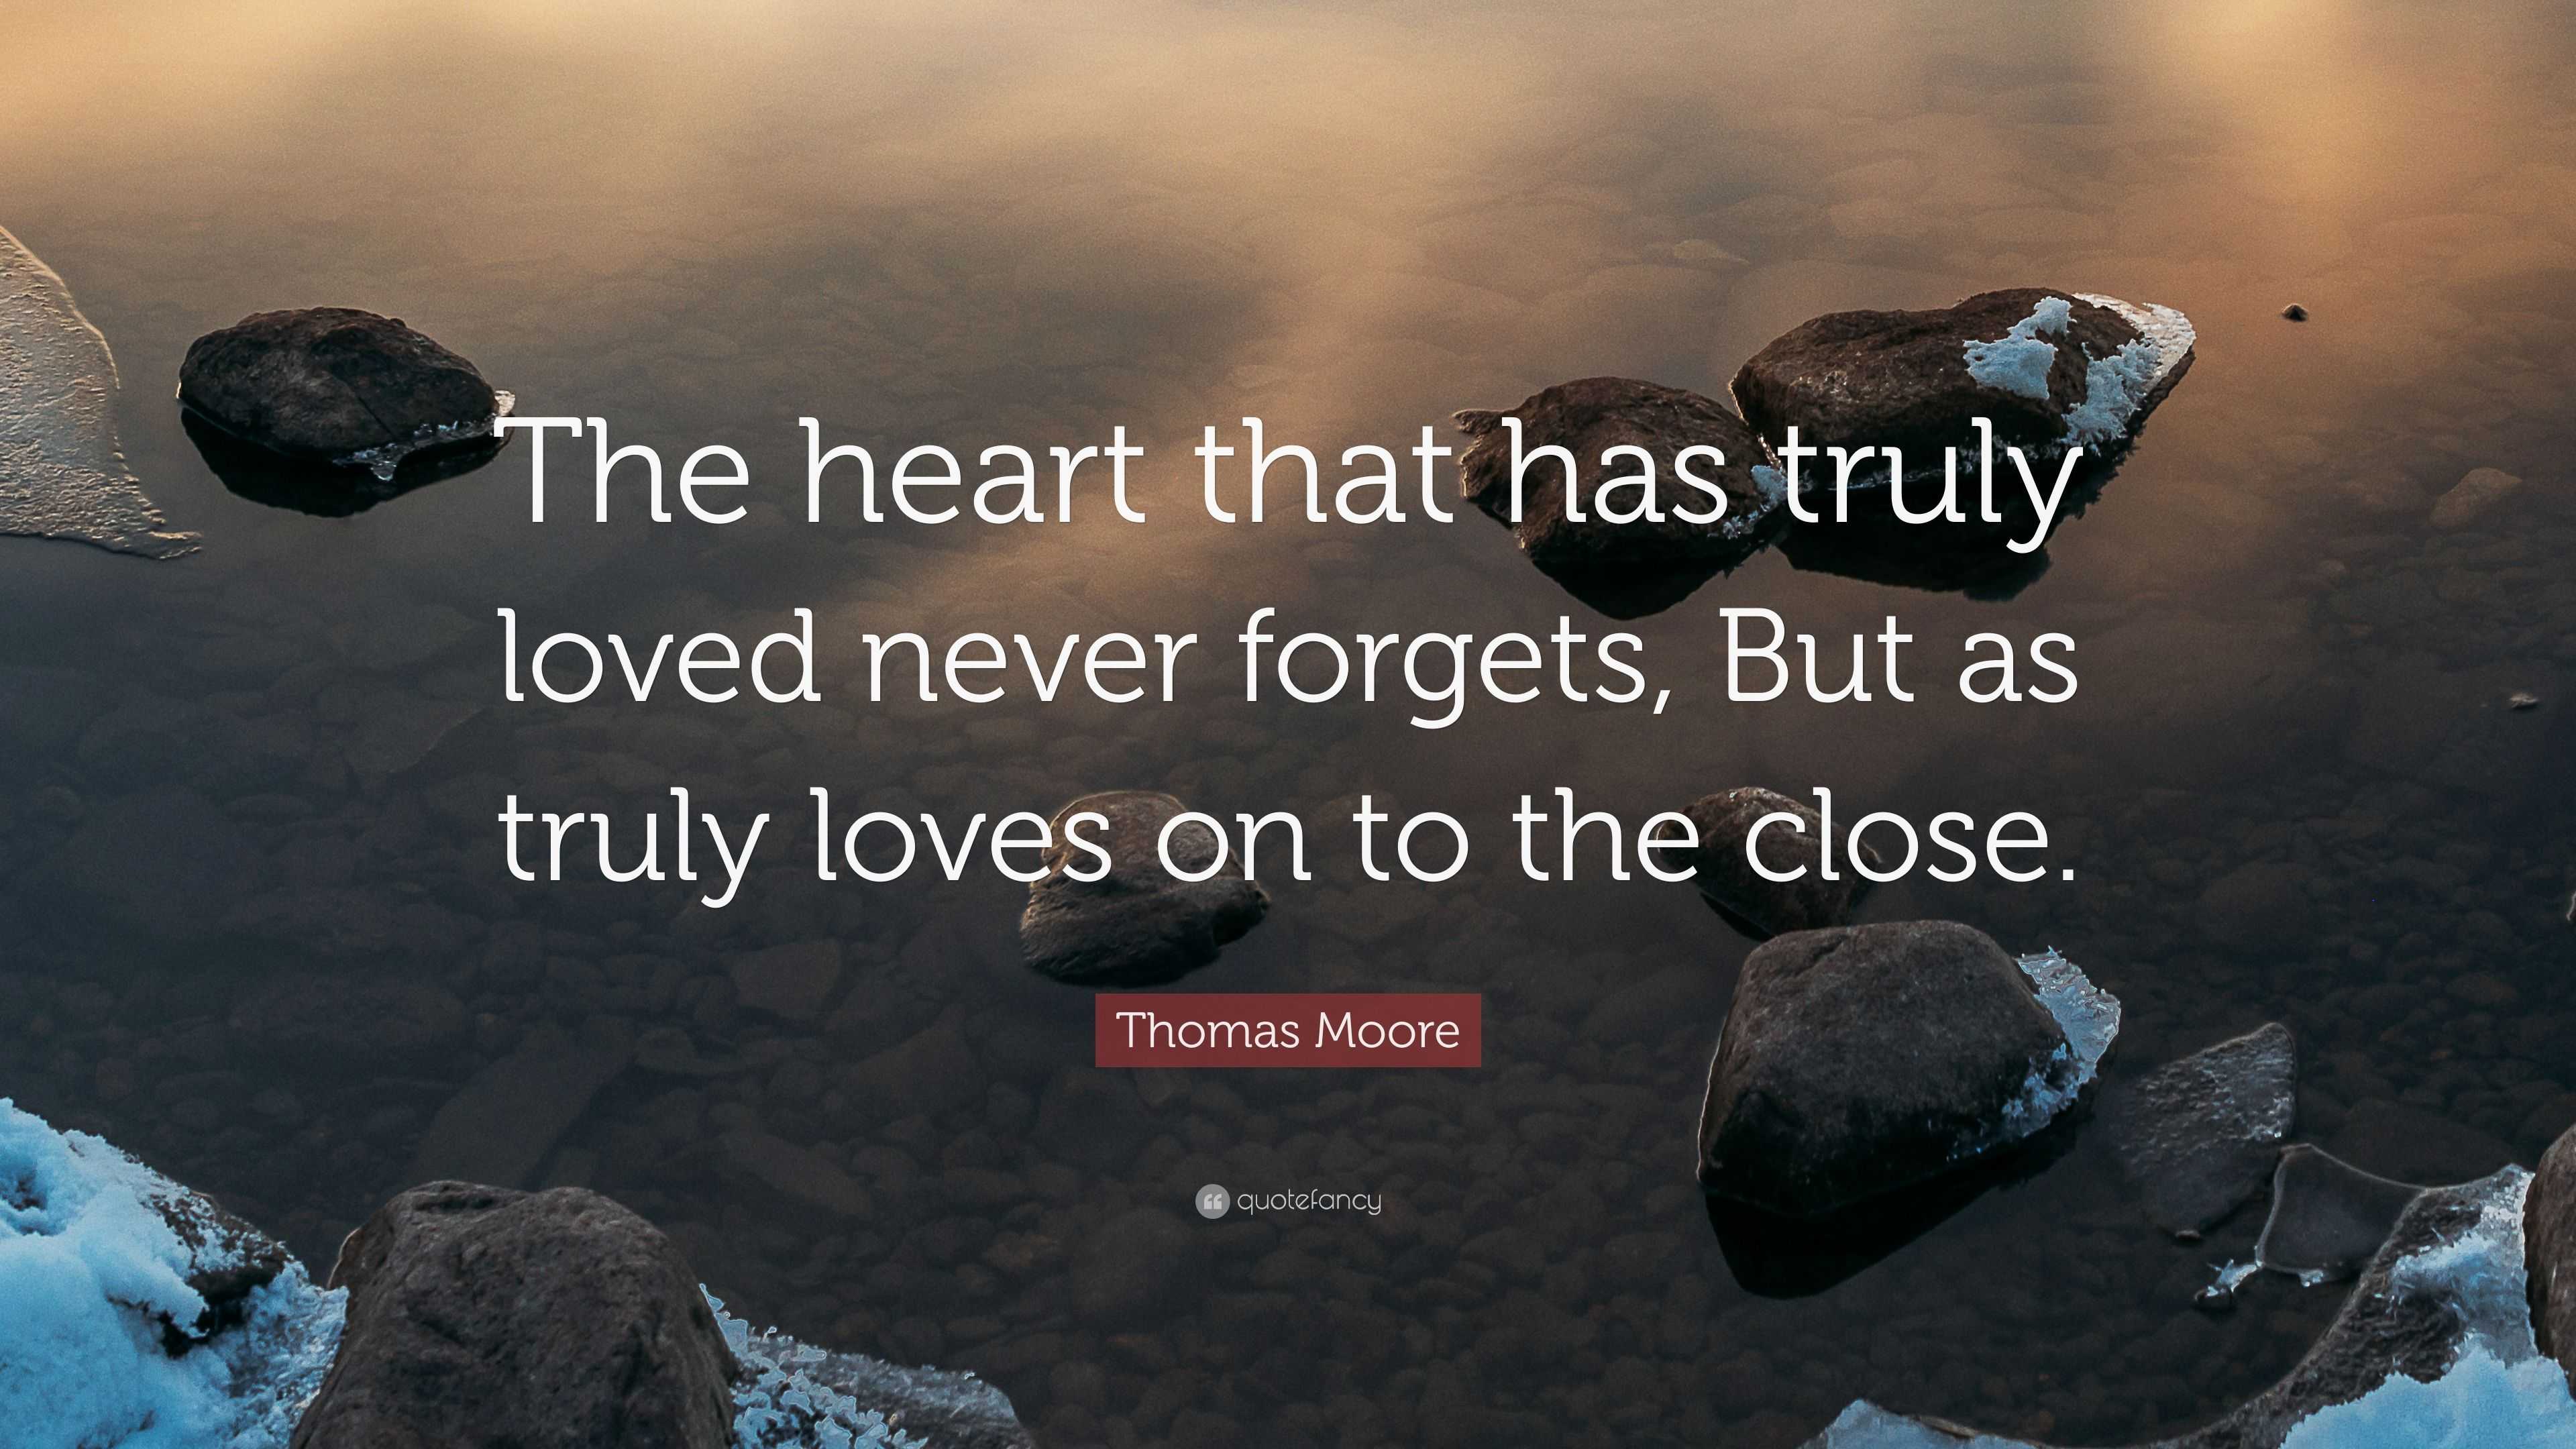 Thomas Moore Quote: “The heart that has truly loved never forgets, But ...